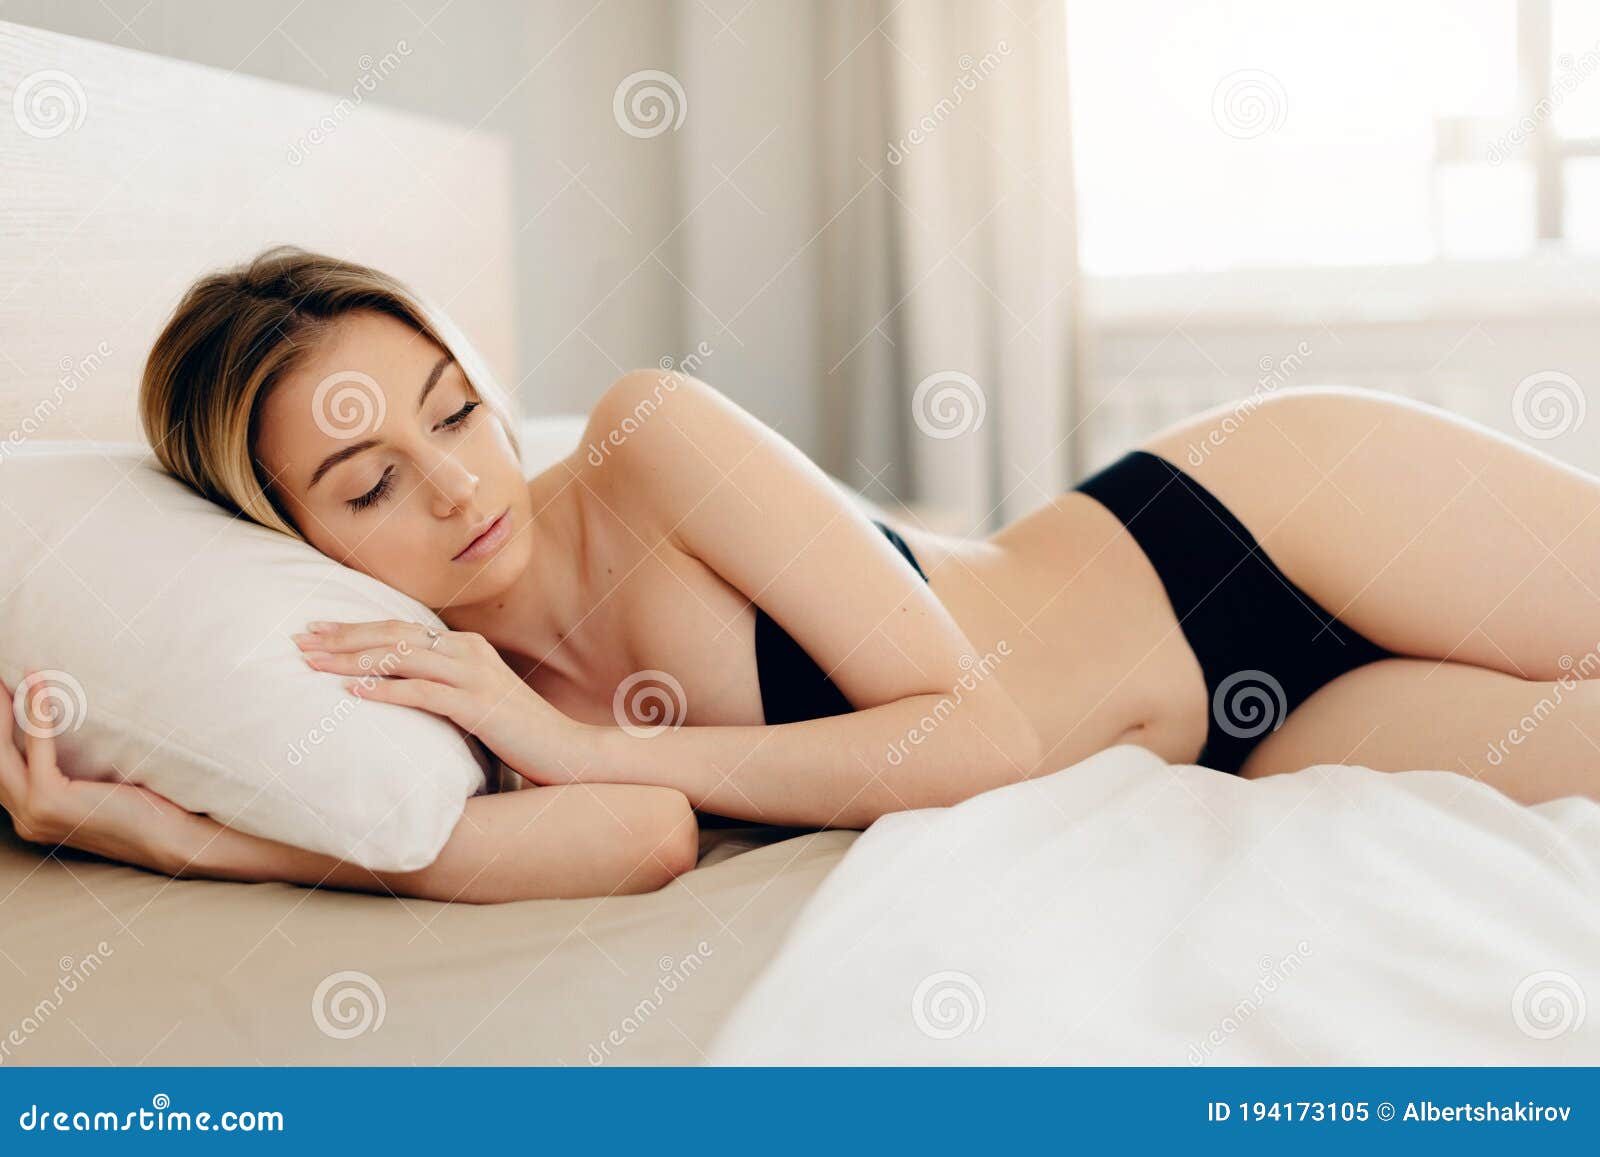 Woman in Black Underwear Sleeping in Bed in Seductive Pose without Blanket.  Stock Image - Image of european, home: 194173105